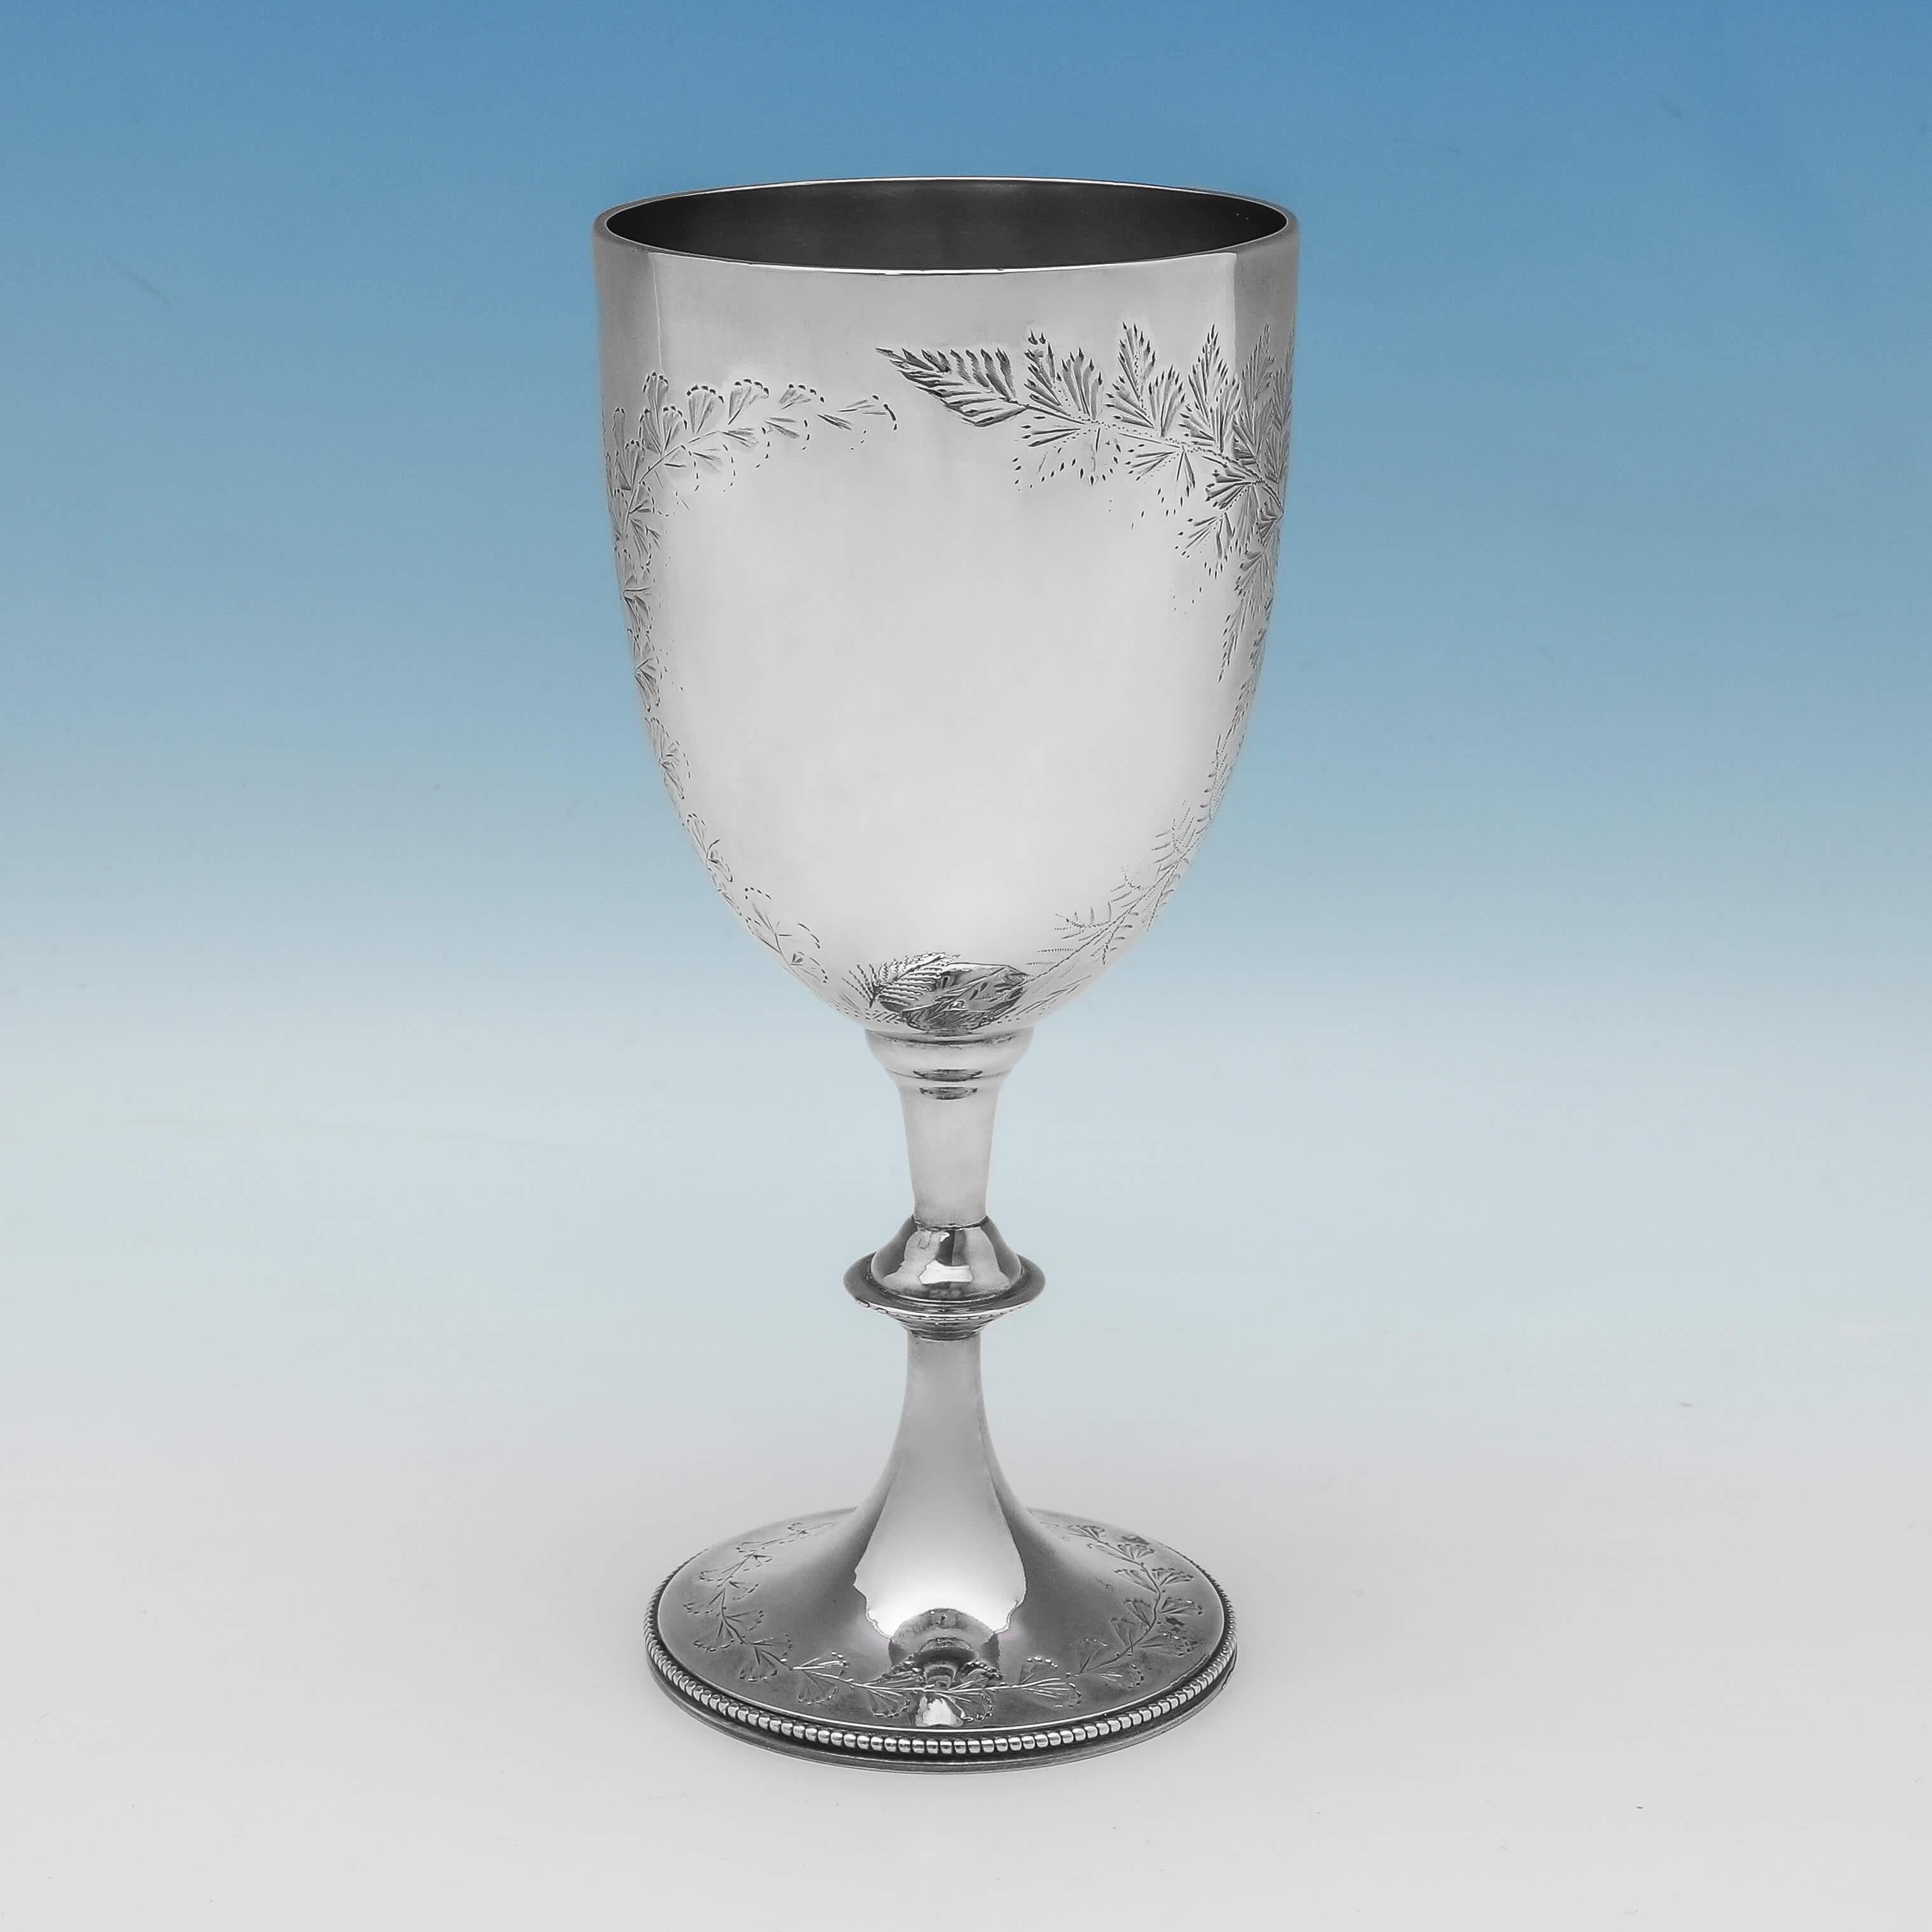 Hallmarked in London in 1892 by Charles Stuart Harris, this attractive, Victorian, antique sterling silver goblet, features bright cut engraved foliage decoration and a bead border around the foot. The goblet measures 7